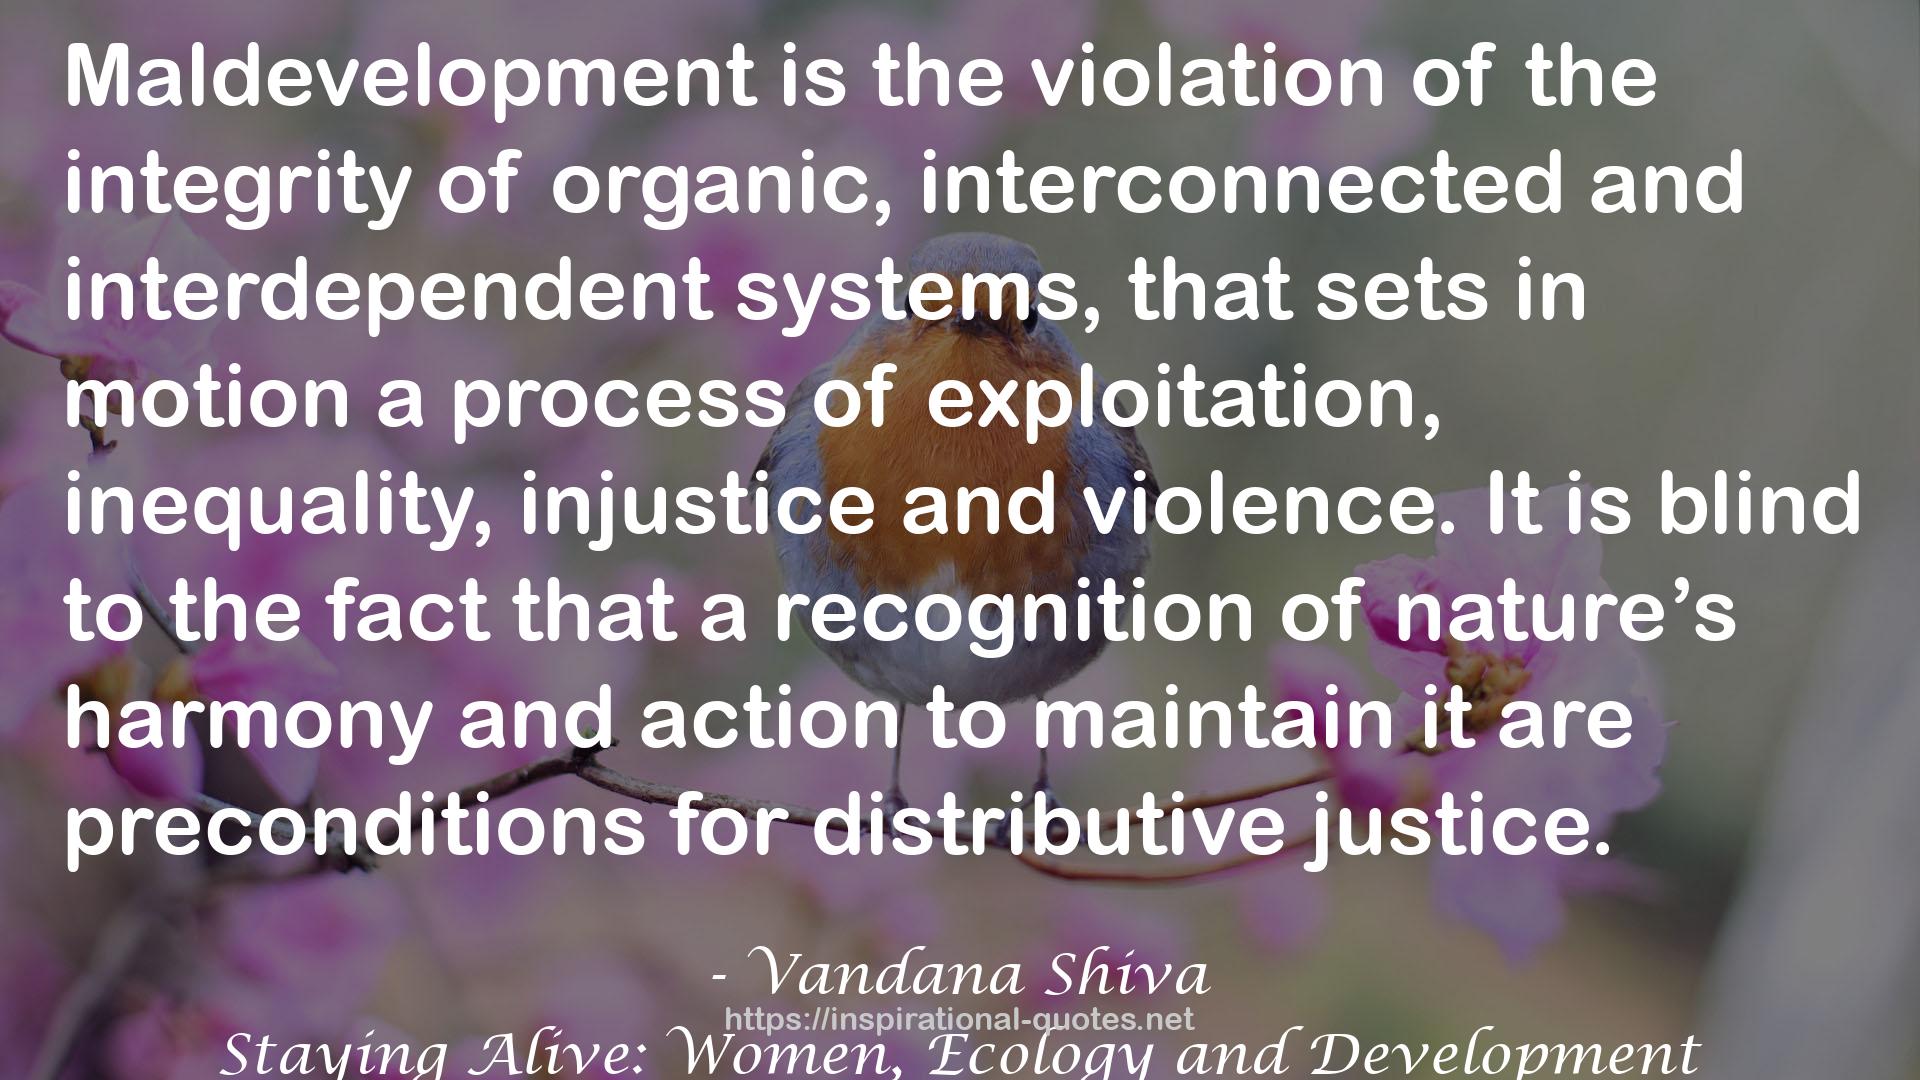 Staying Alive: Women, Ecology and Development QUOTES